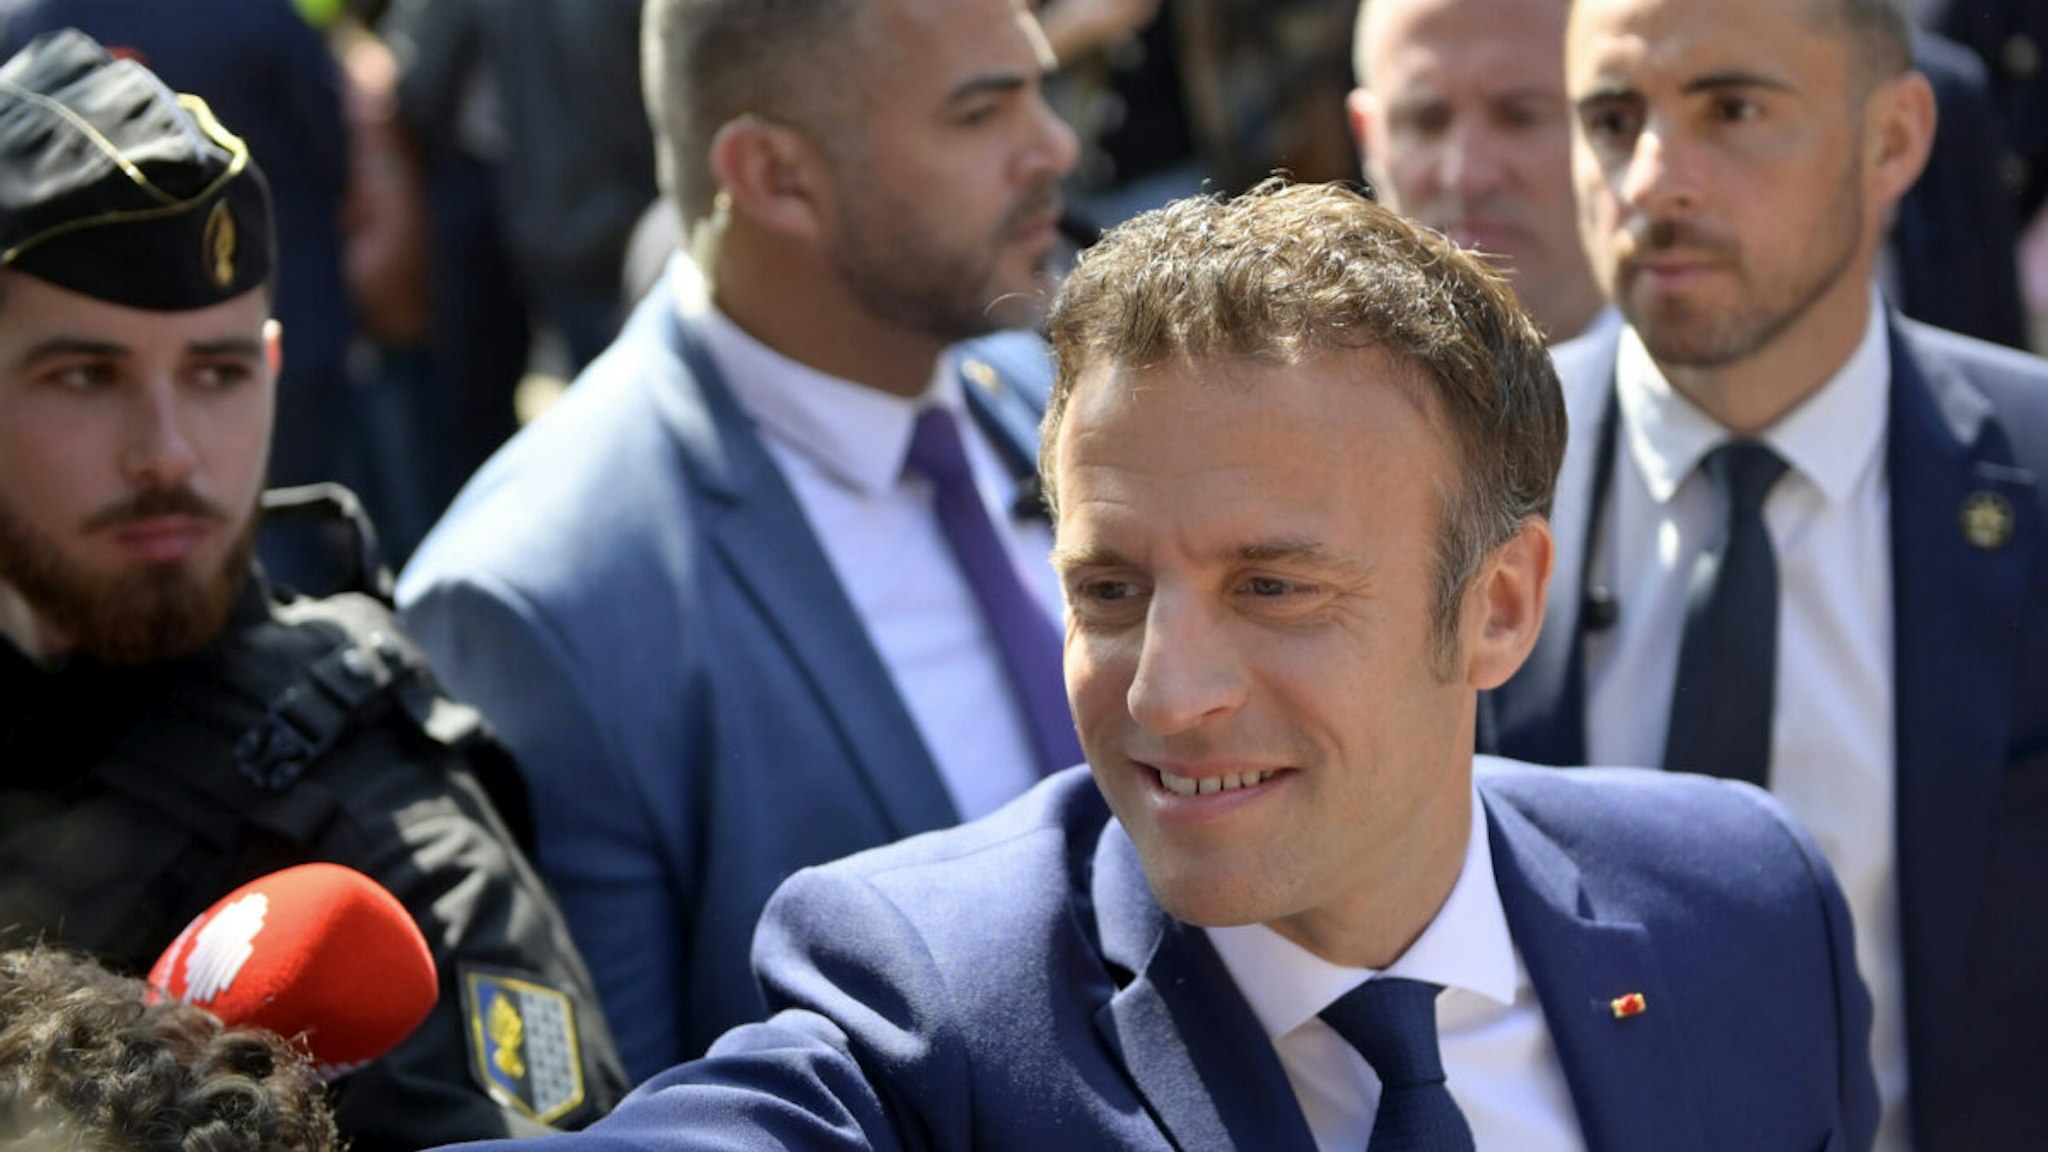 Emmanuel Macron salutes voters as he leaves his house to go vote on April 24, 2022 in Le Touquet-Paris-Plage, France. Emmanuel Macron and Marine Le Pen were both qualified on Sunday April 10th for France's 2022 presidential election second round to be held on April 24